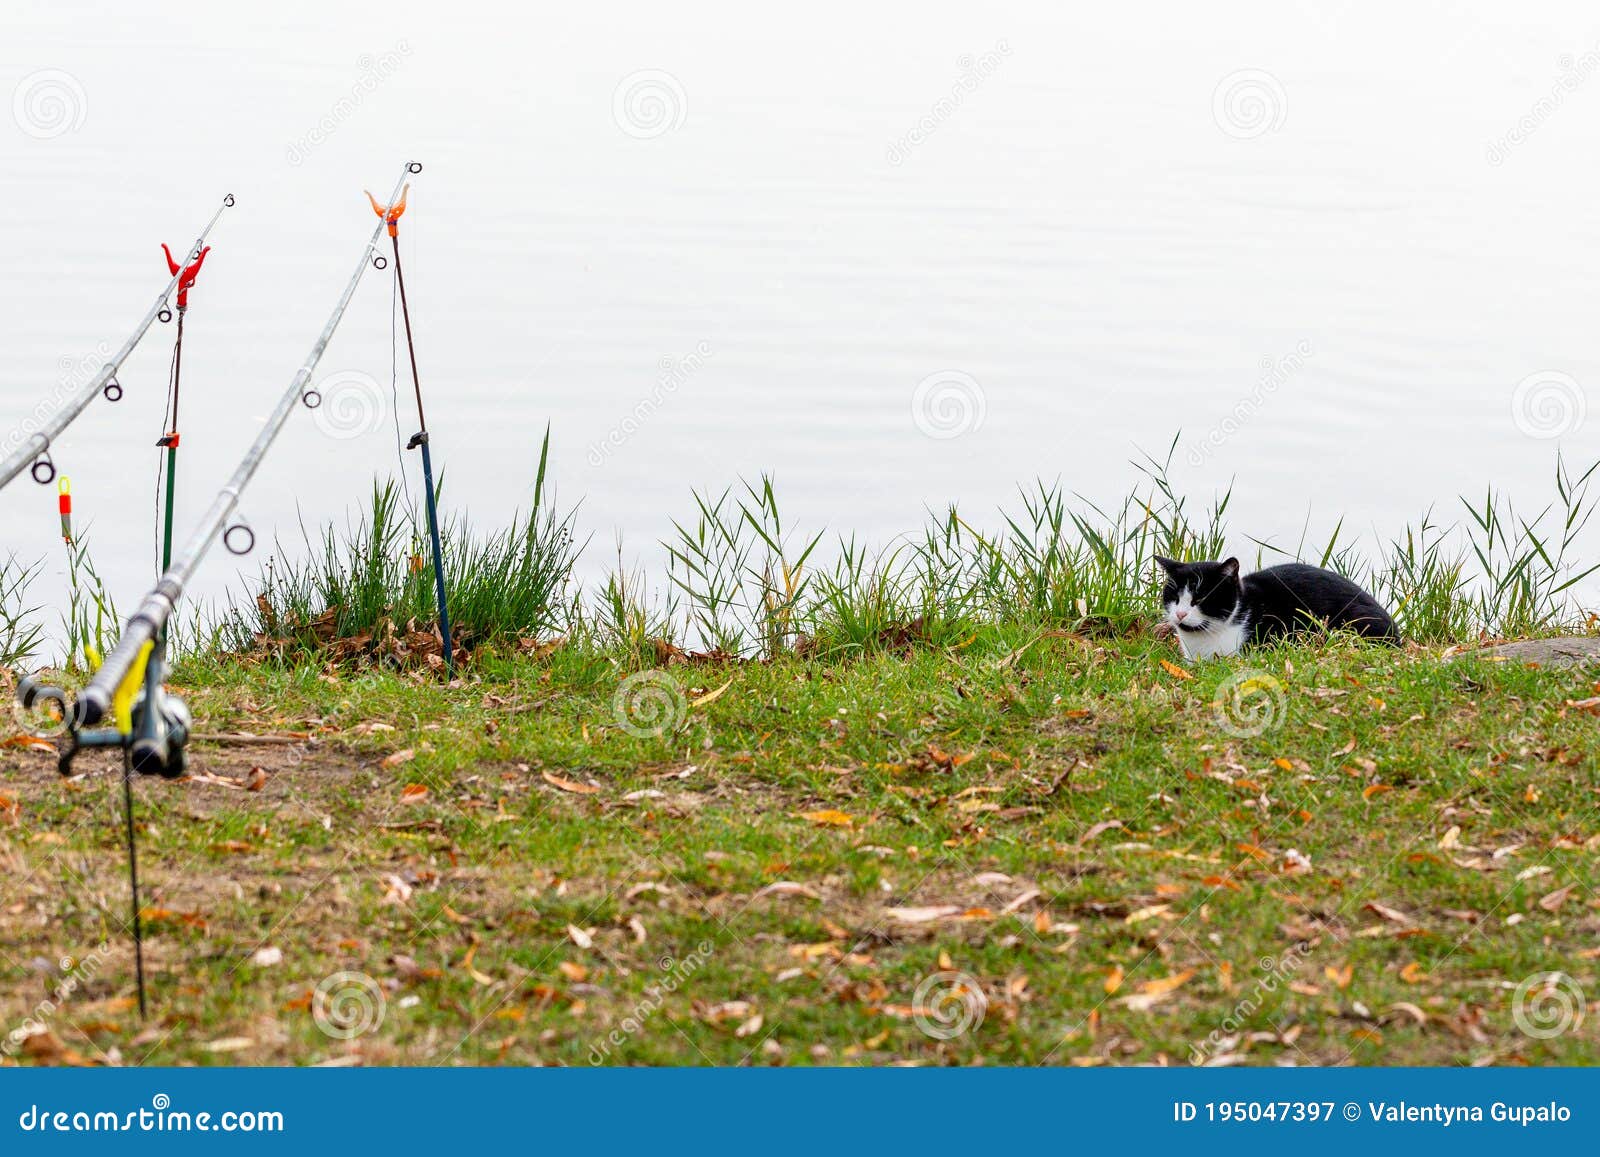 Funny Black And White Cat Sits On The Shore Of Pond Near Fishing Rod